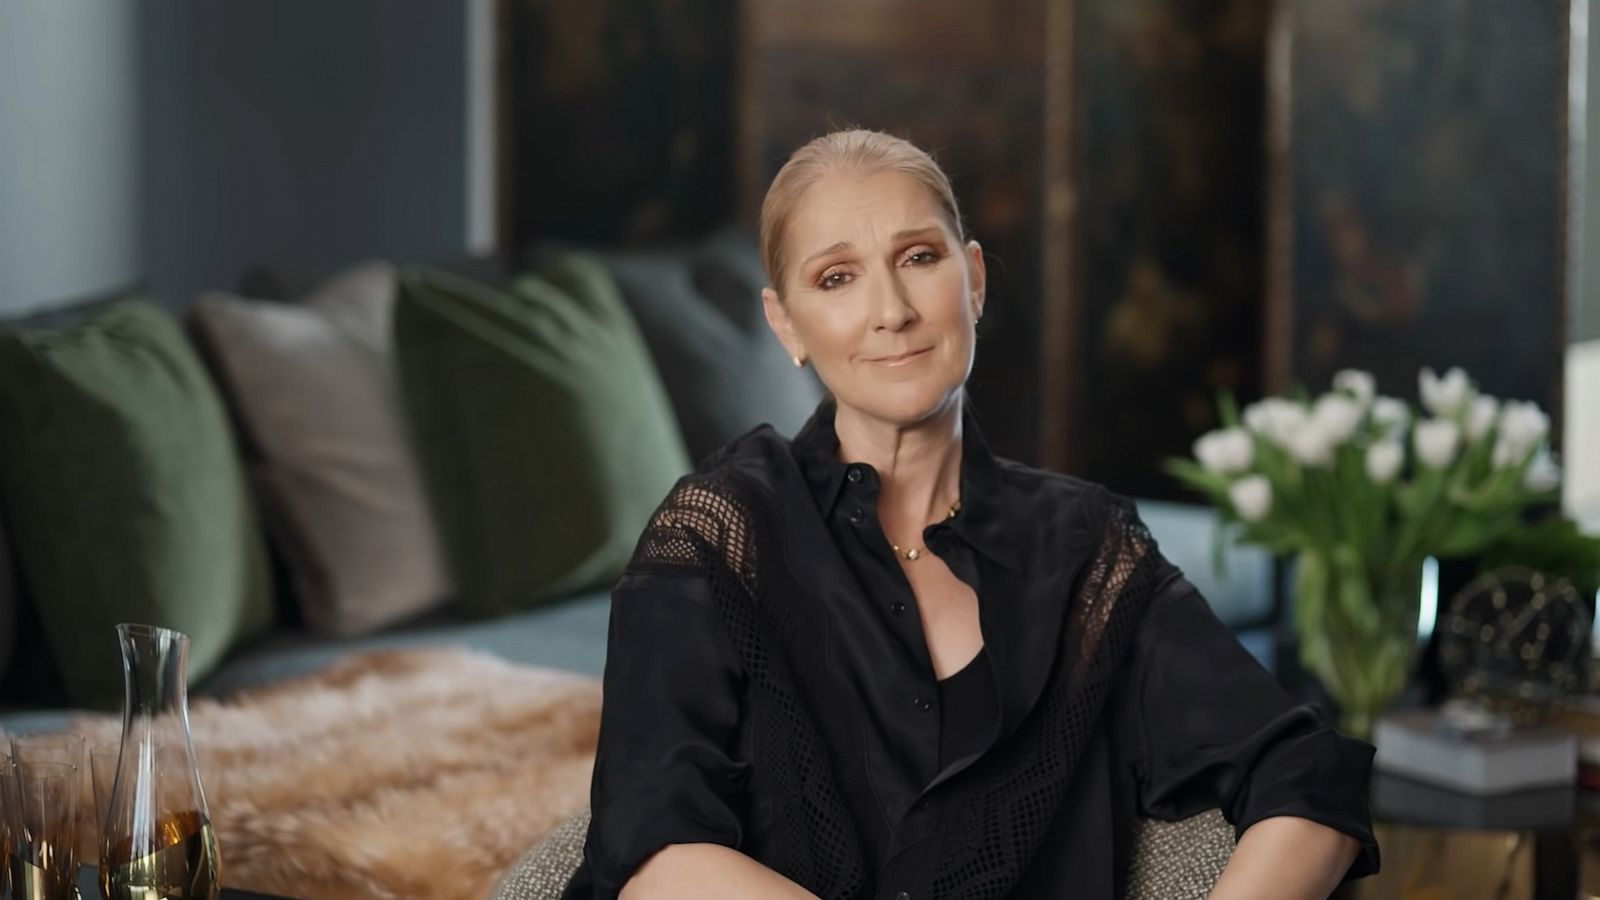 Is Celine Dion in good health? Here's Everything We Know About Her Ongoing Health Battle